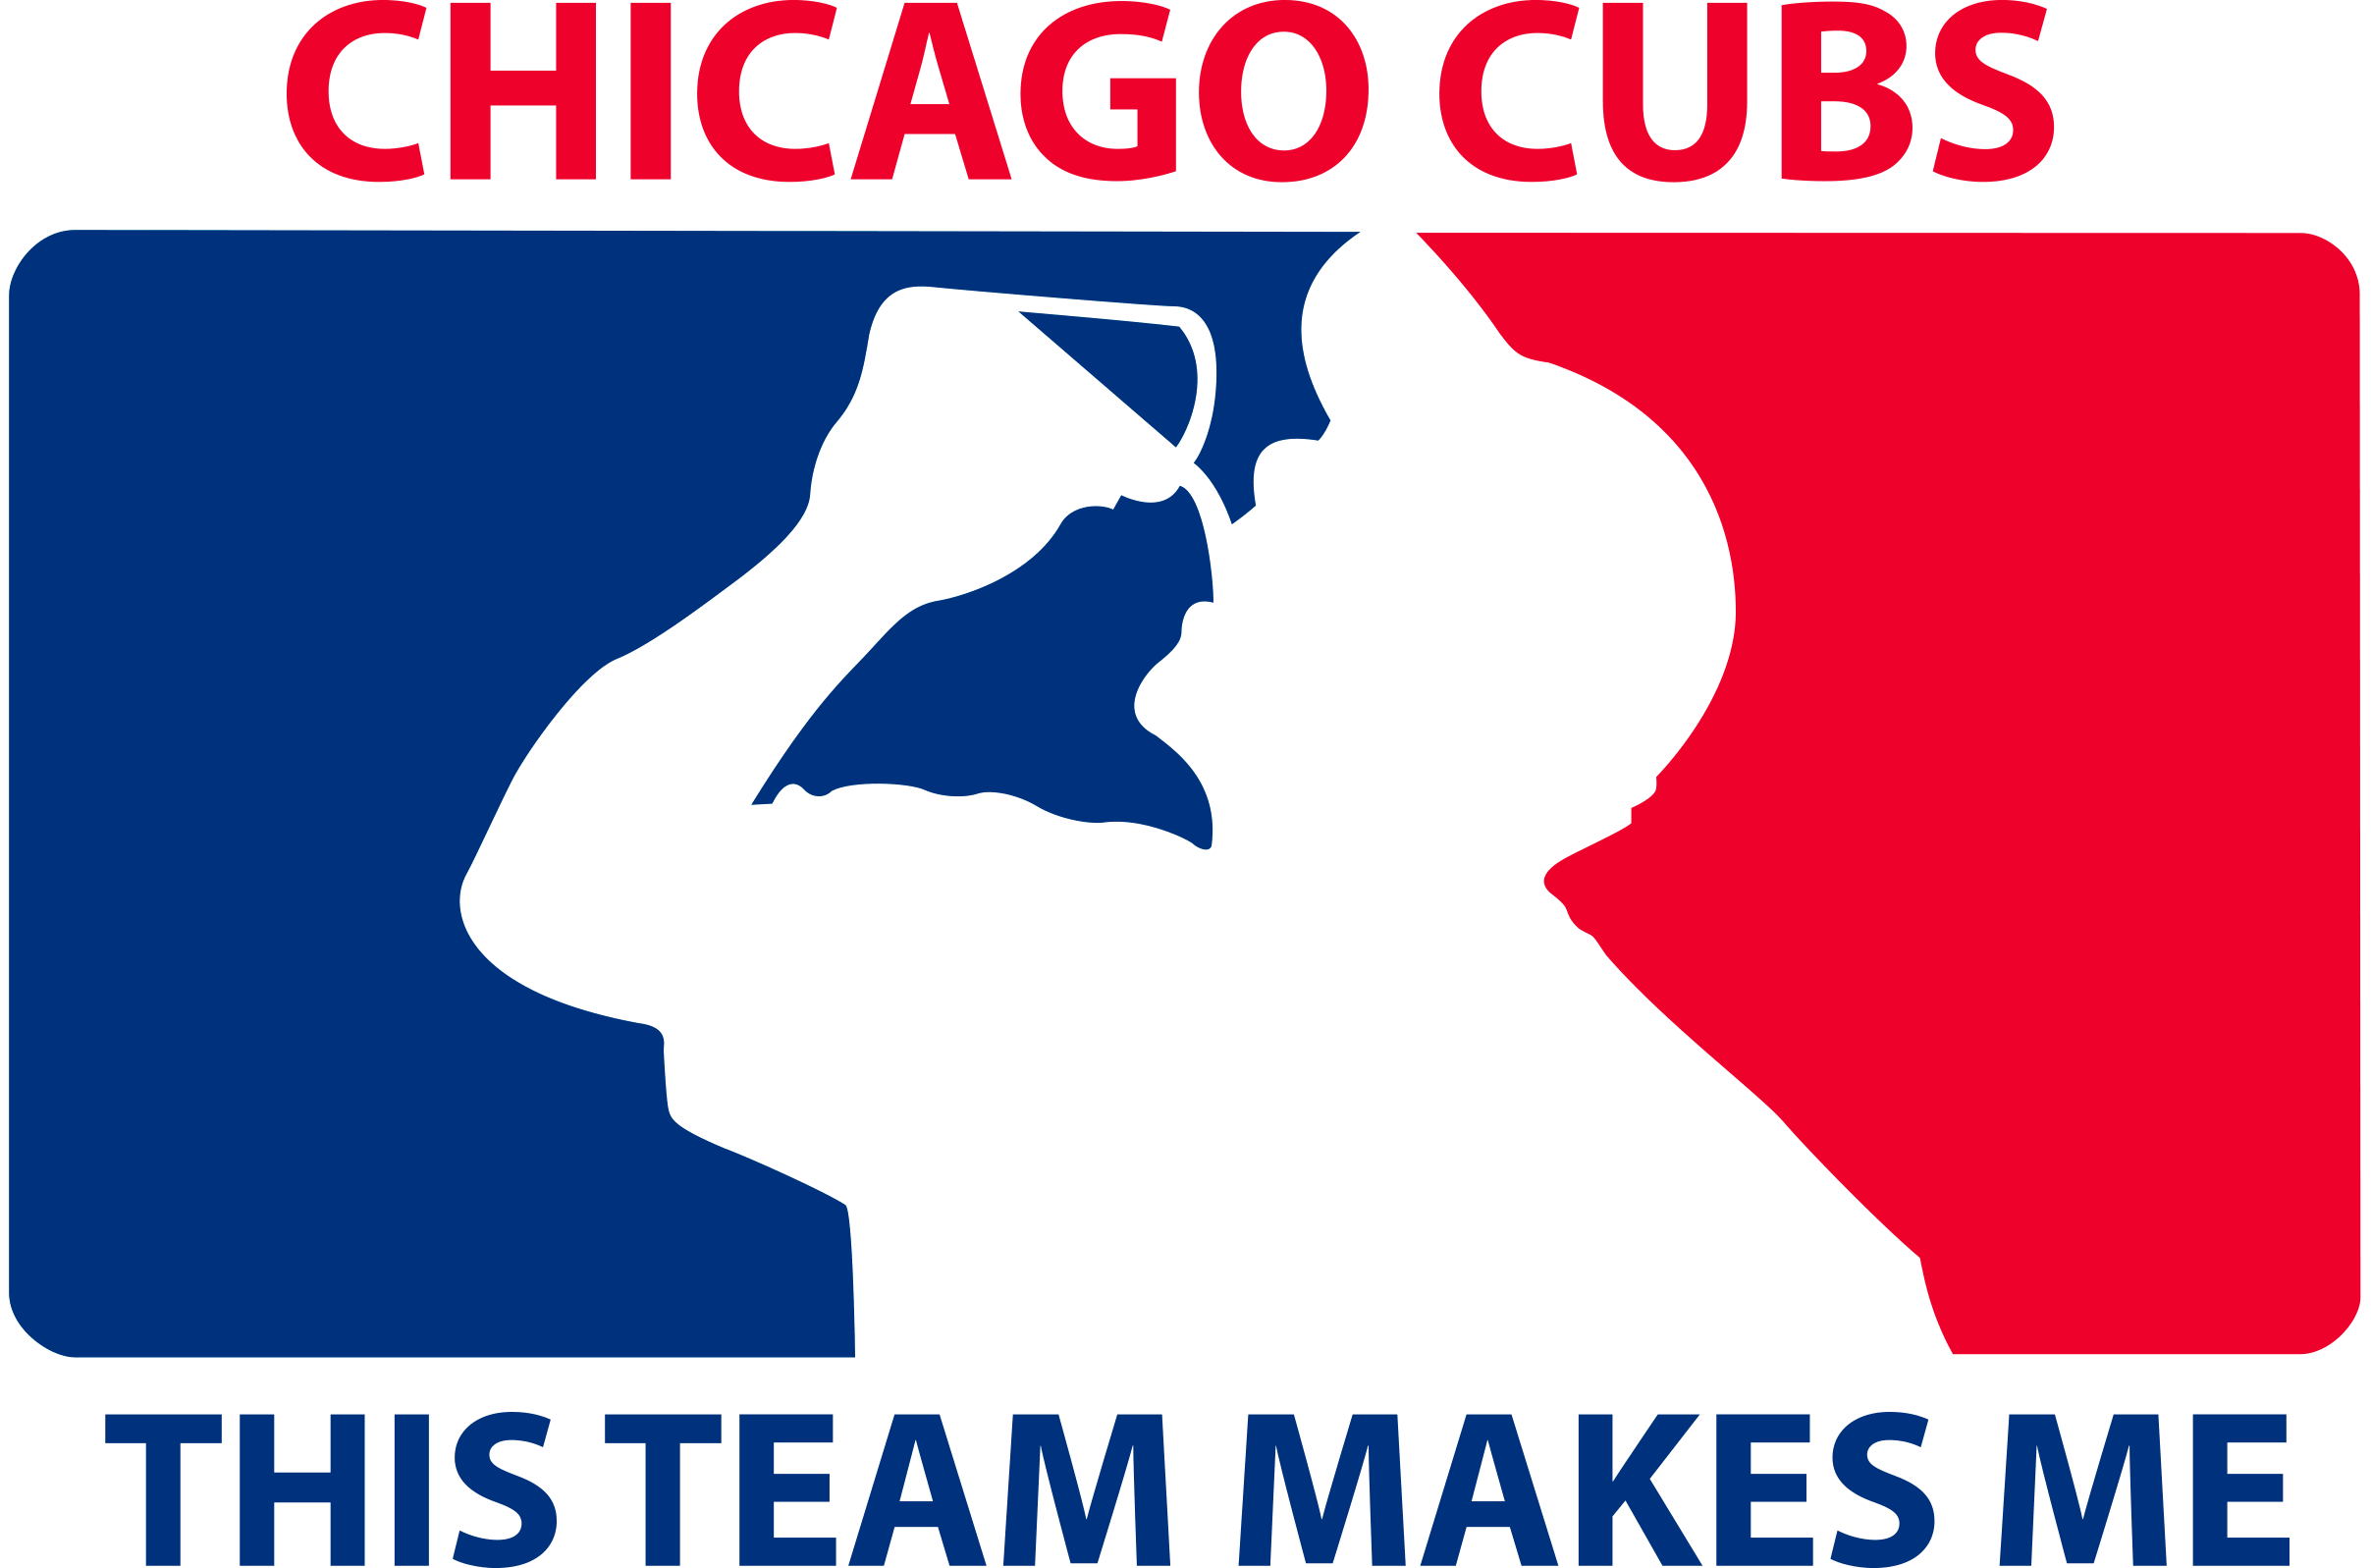 12 Styles MLB Chicago Cubs Svg, Chicago Cubs Svg, Chicago Cubs